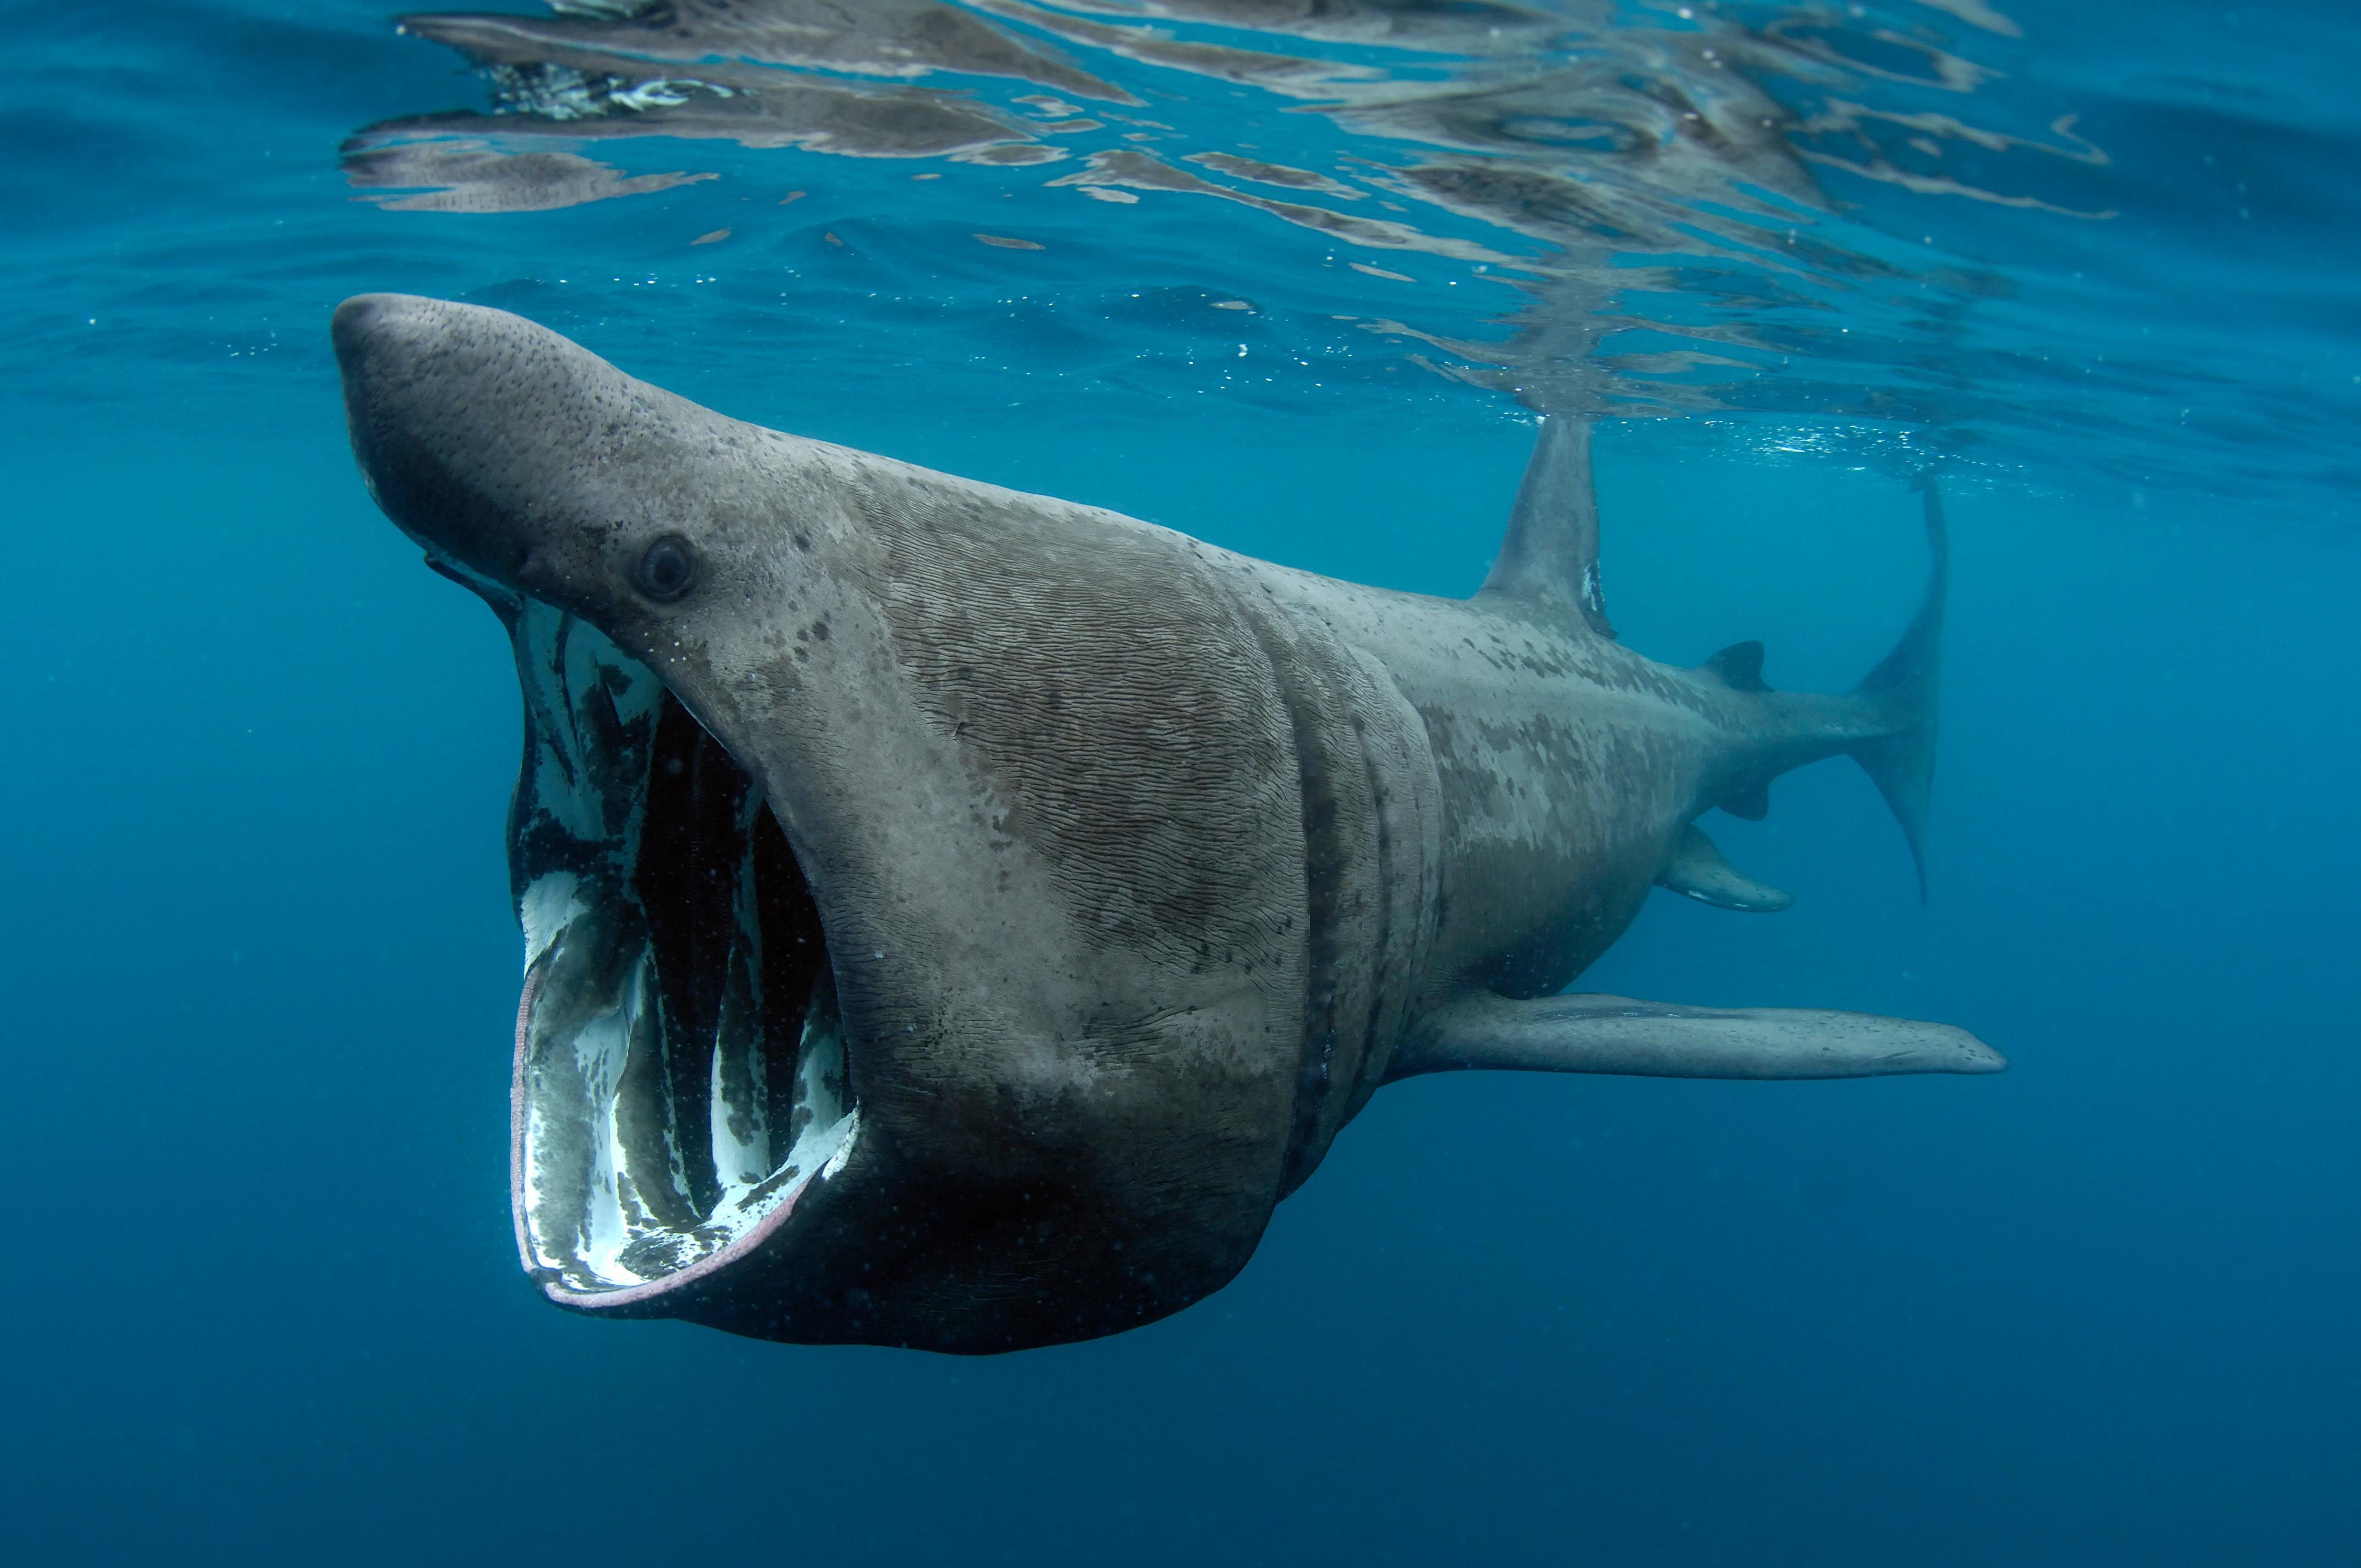 Interview with Charles Hood, Filmer of Basking Sharks